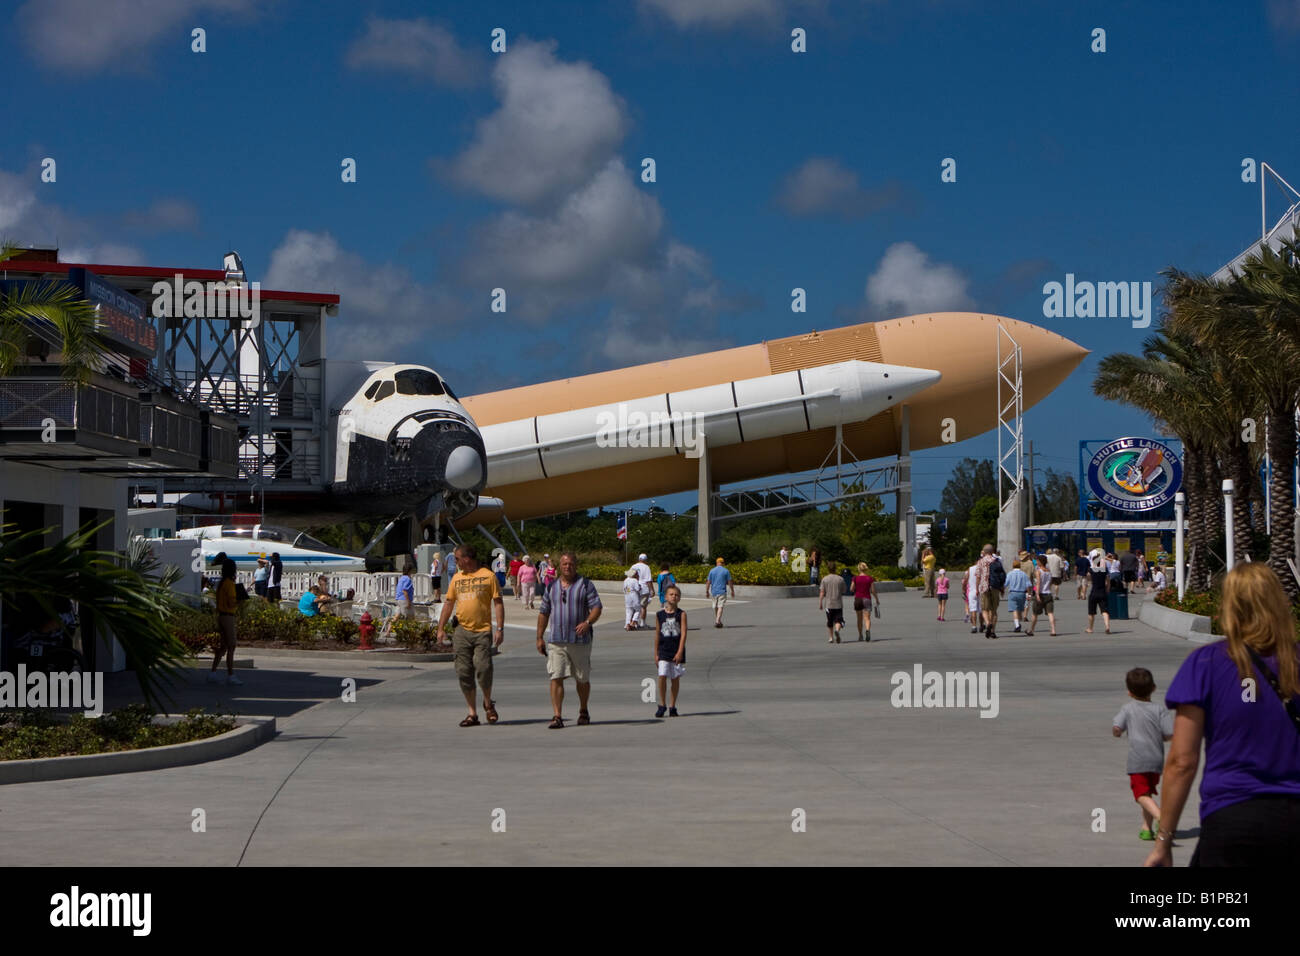 Space Shuttle, External Tank and Rocket Boosters Display at the John F Kennedy Space Center in Cape Canaveral Florida Stock Photo